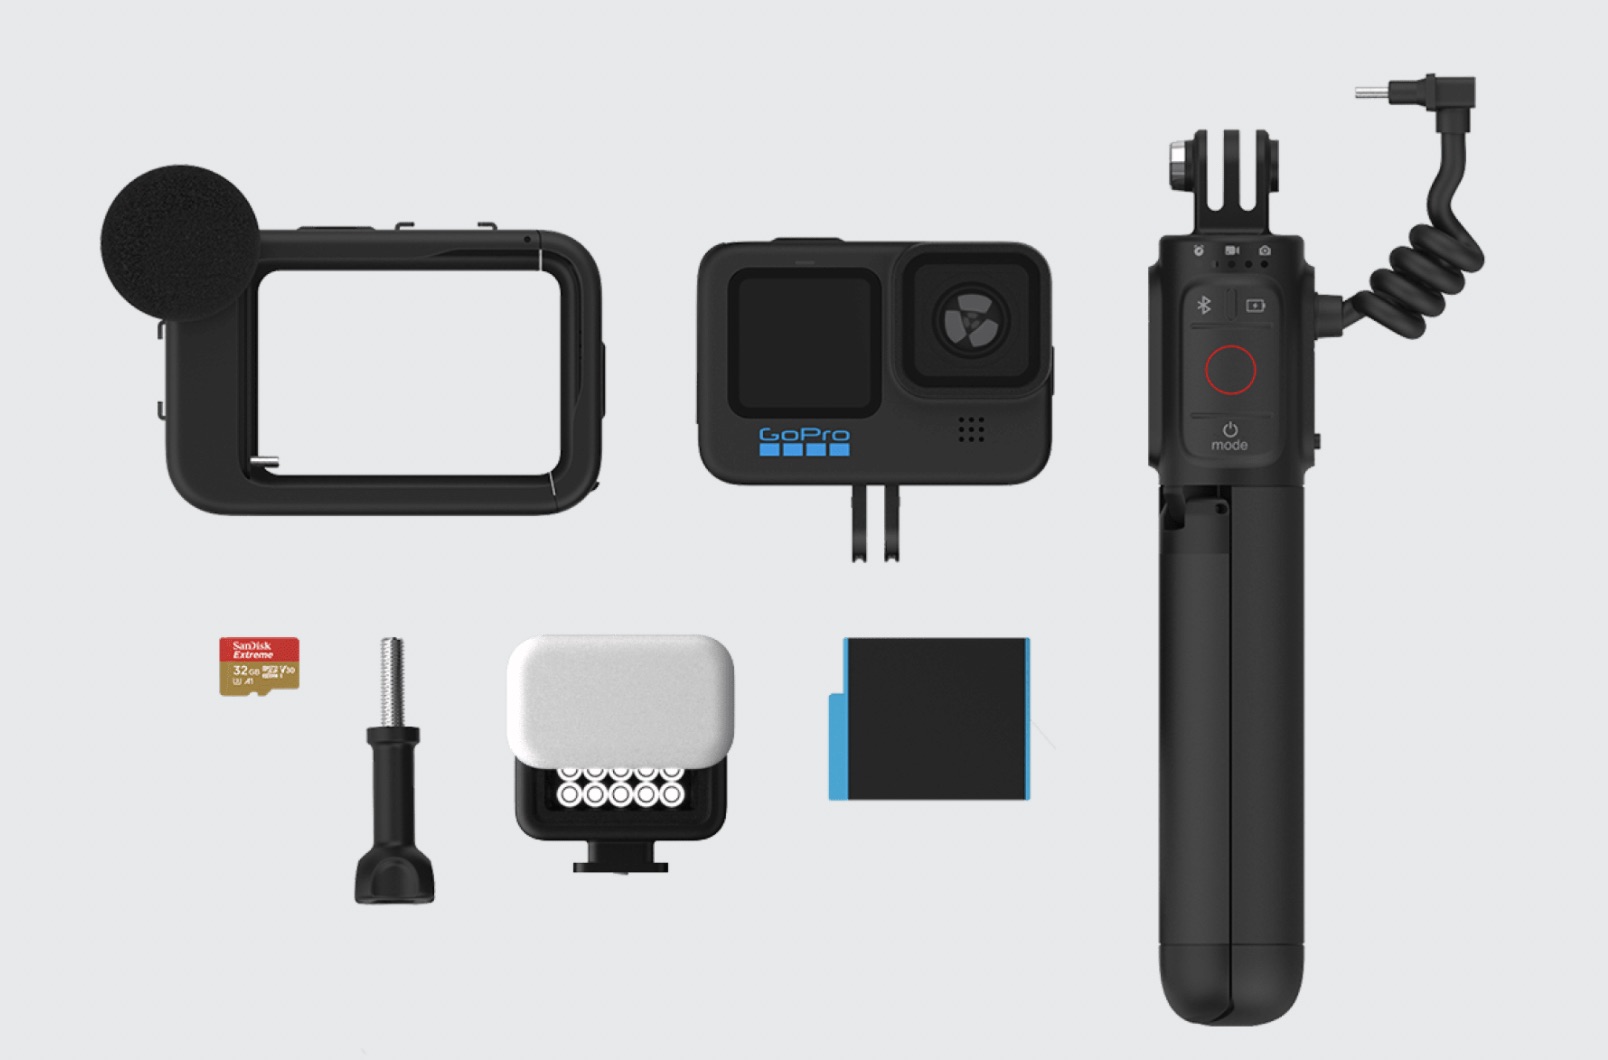 GoPro Hero 12 Black: It's All About The Battery - Alex Reviews Tech